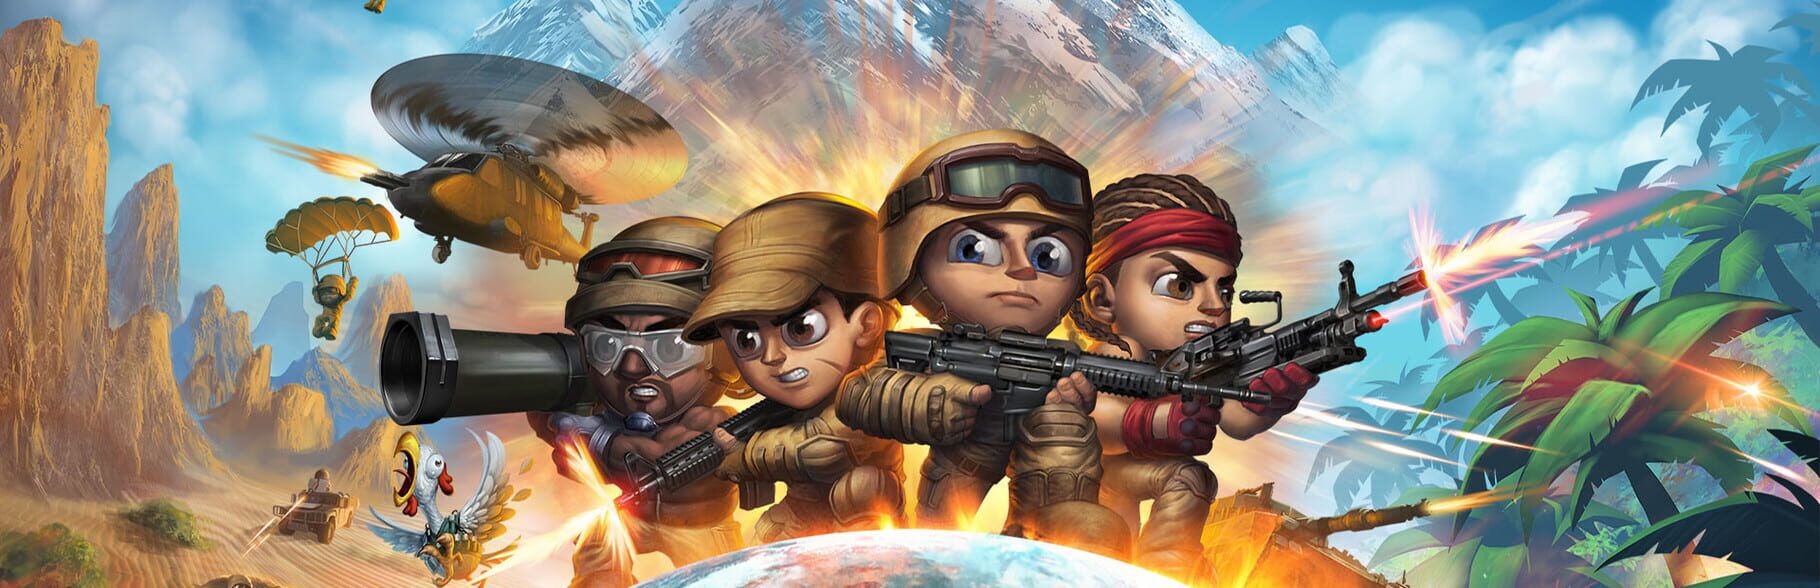 Tiny Troopers: Global Ops artwork